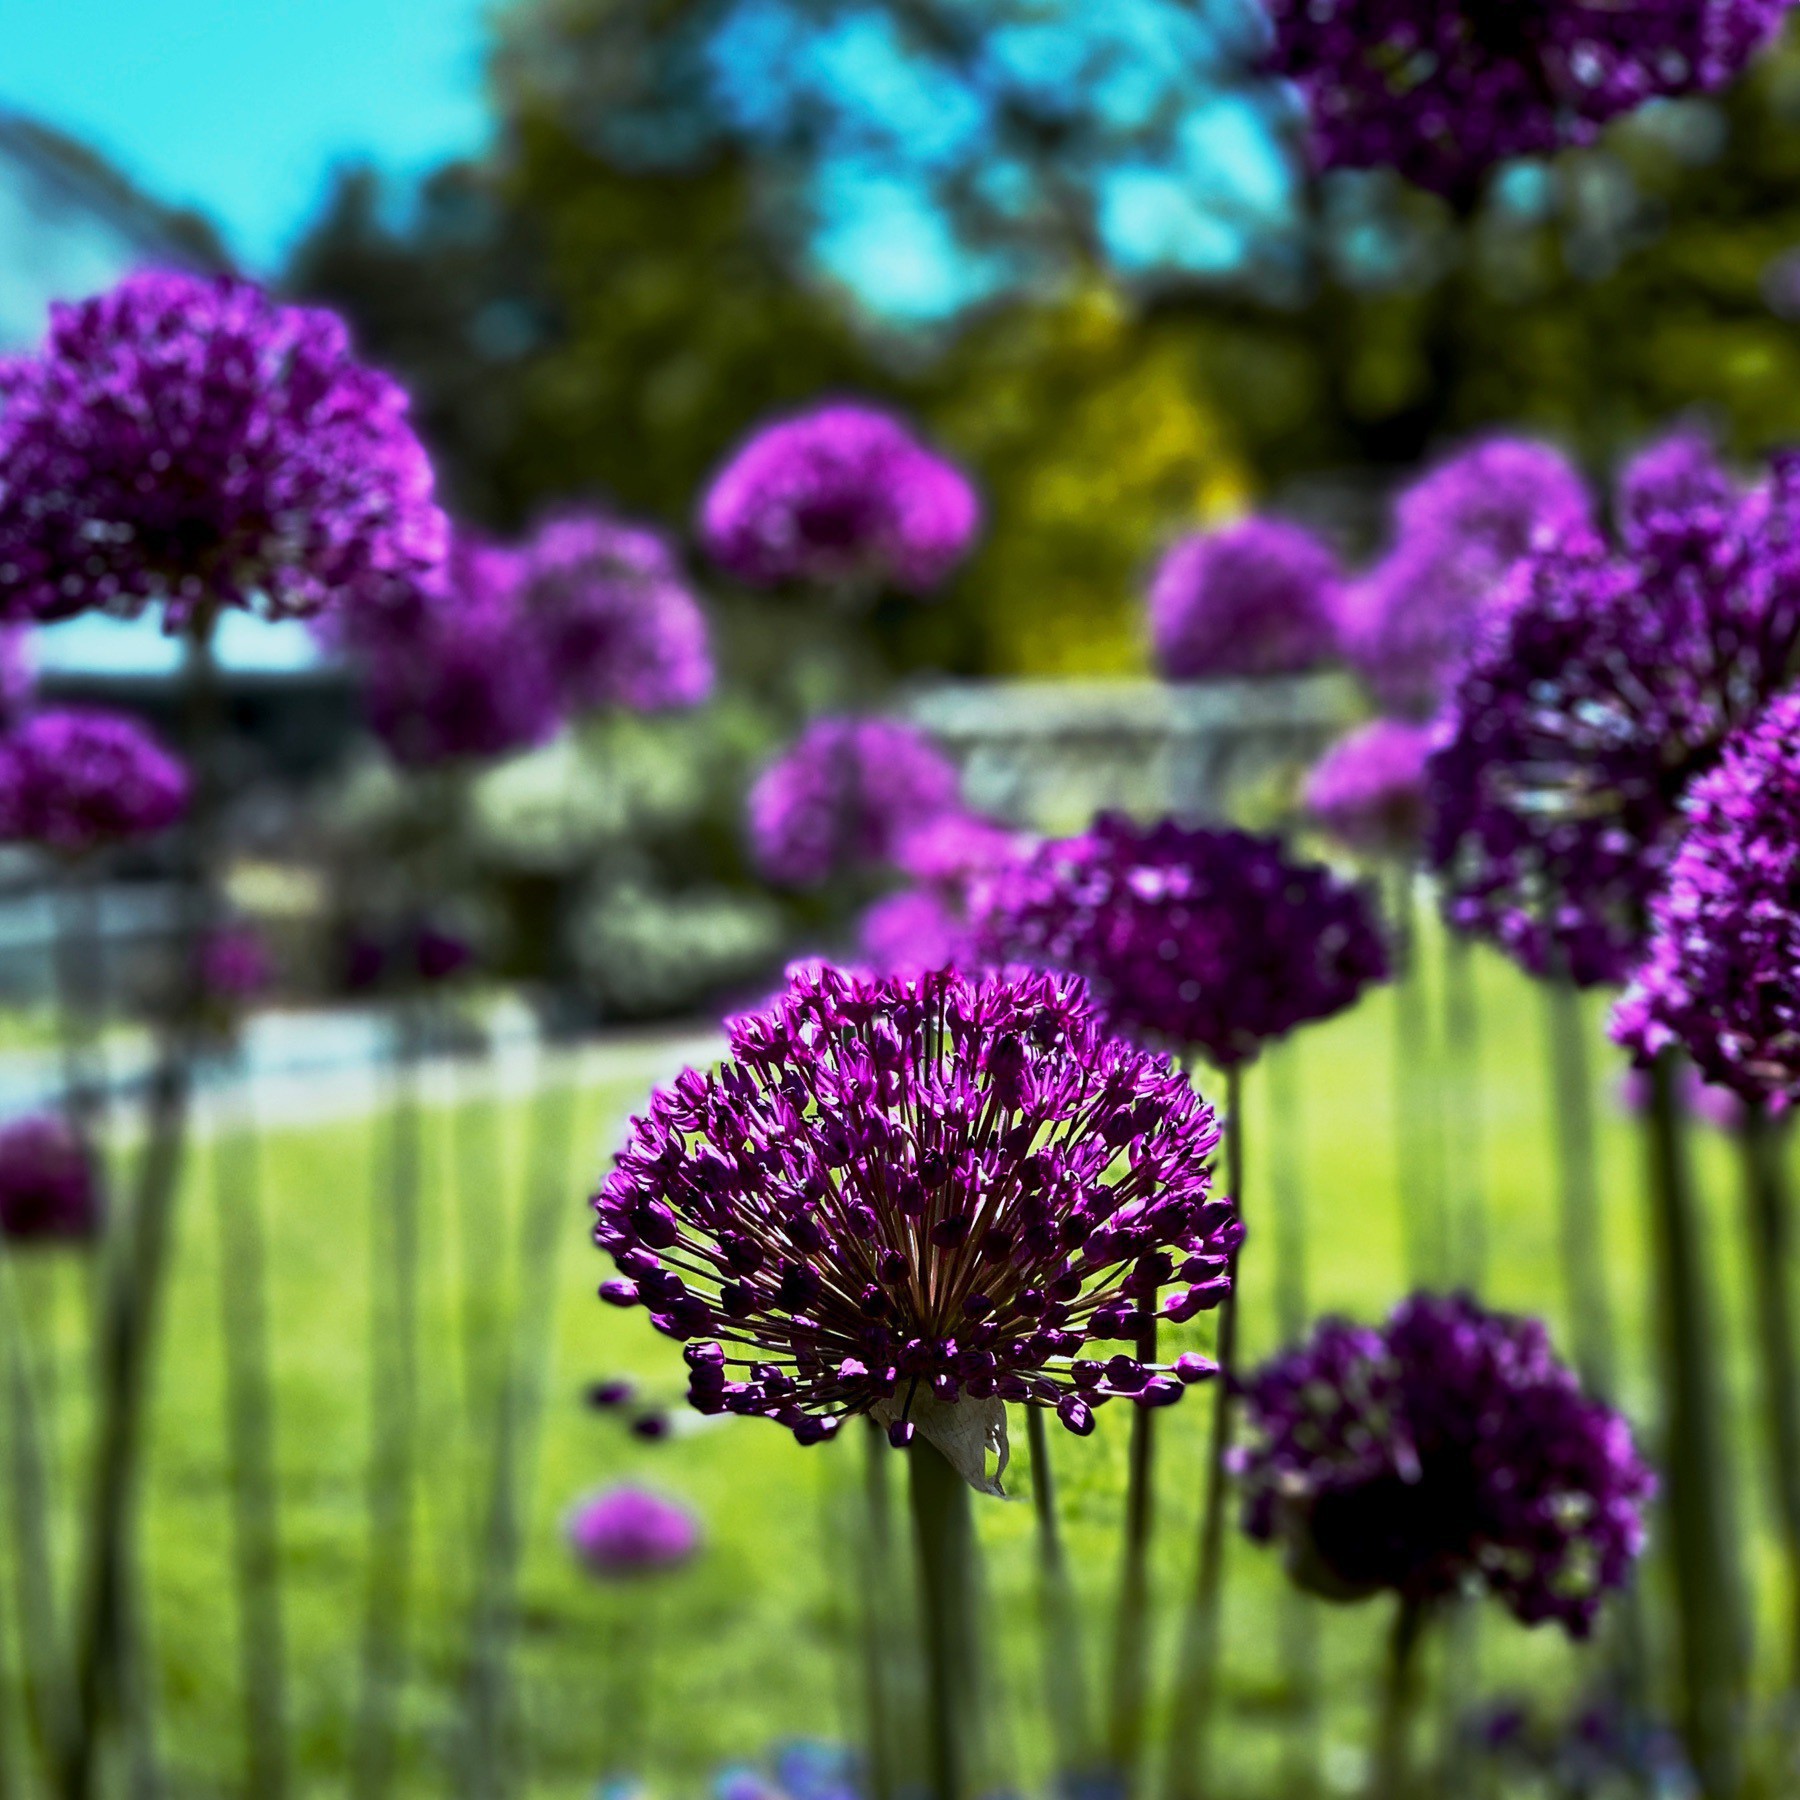 Purple long stemmed flowers at Wave Hill Gardens. Grass and trees in background.